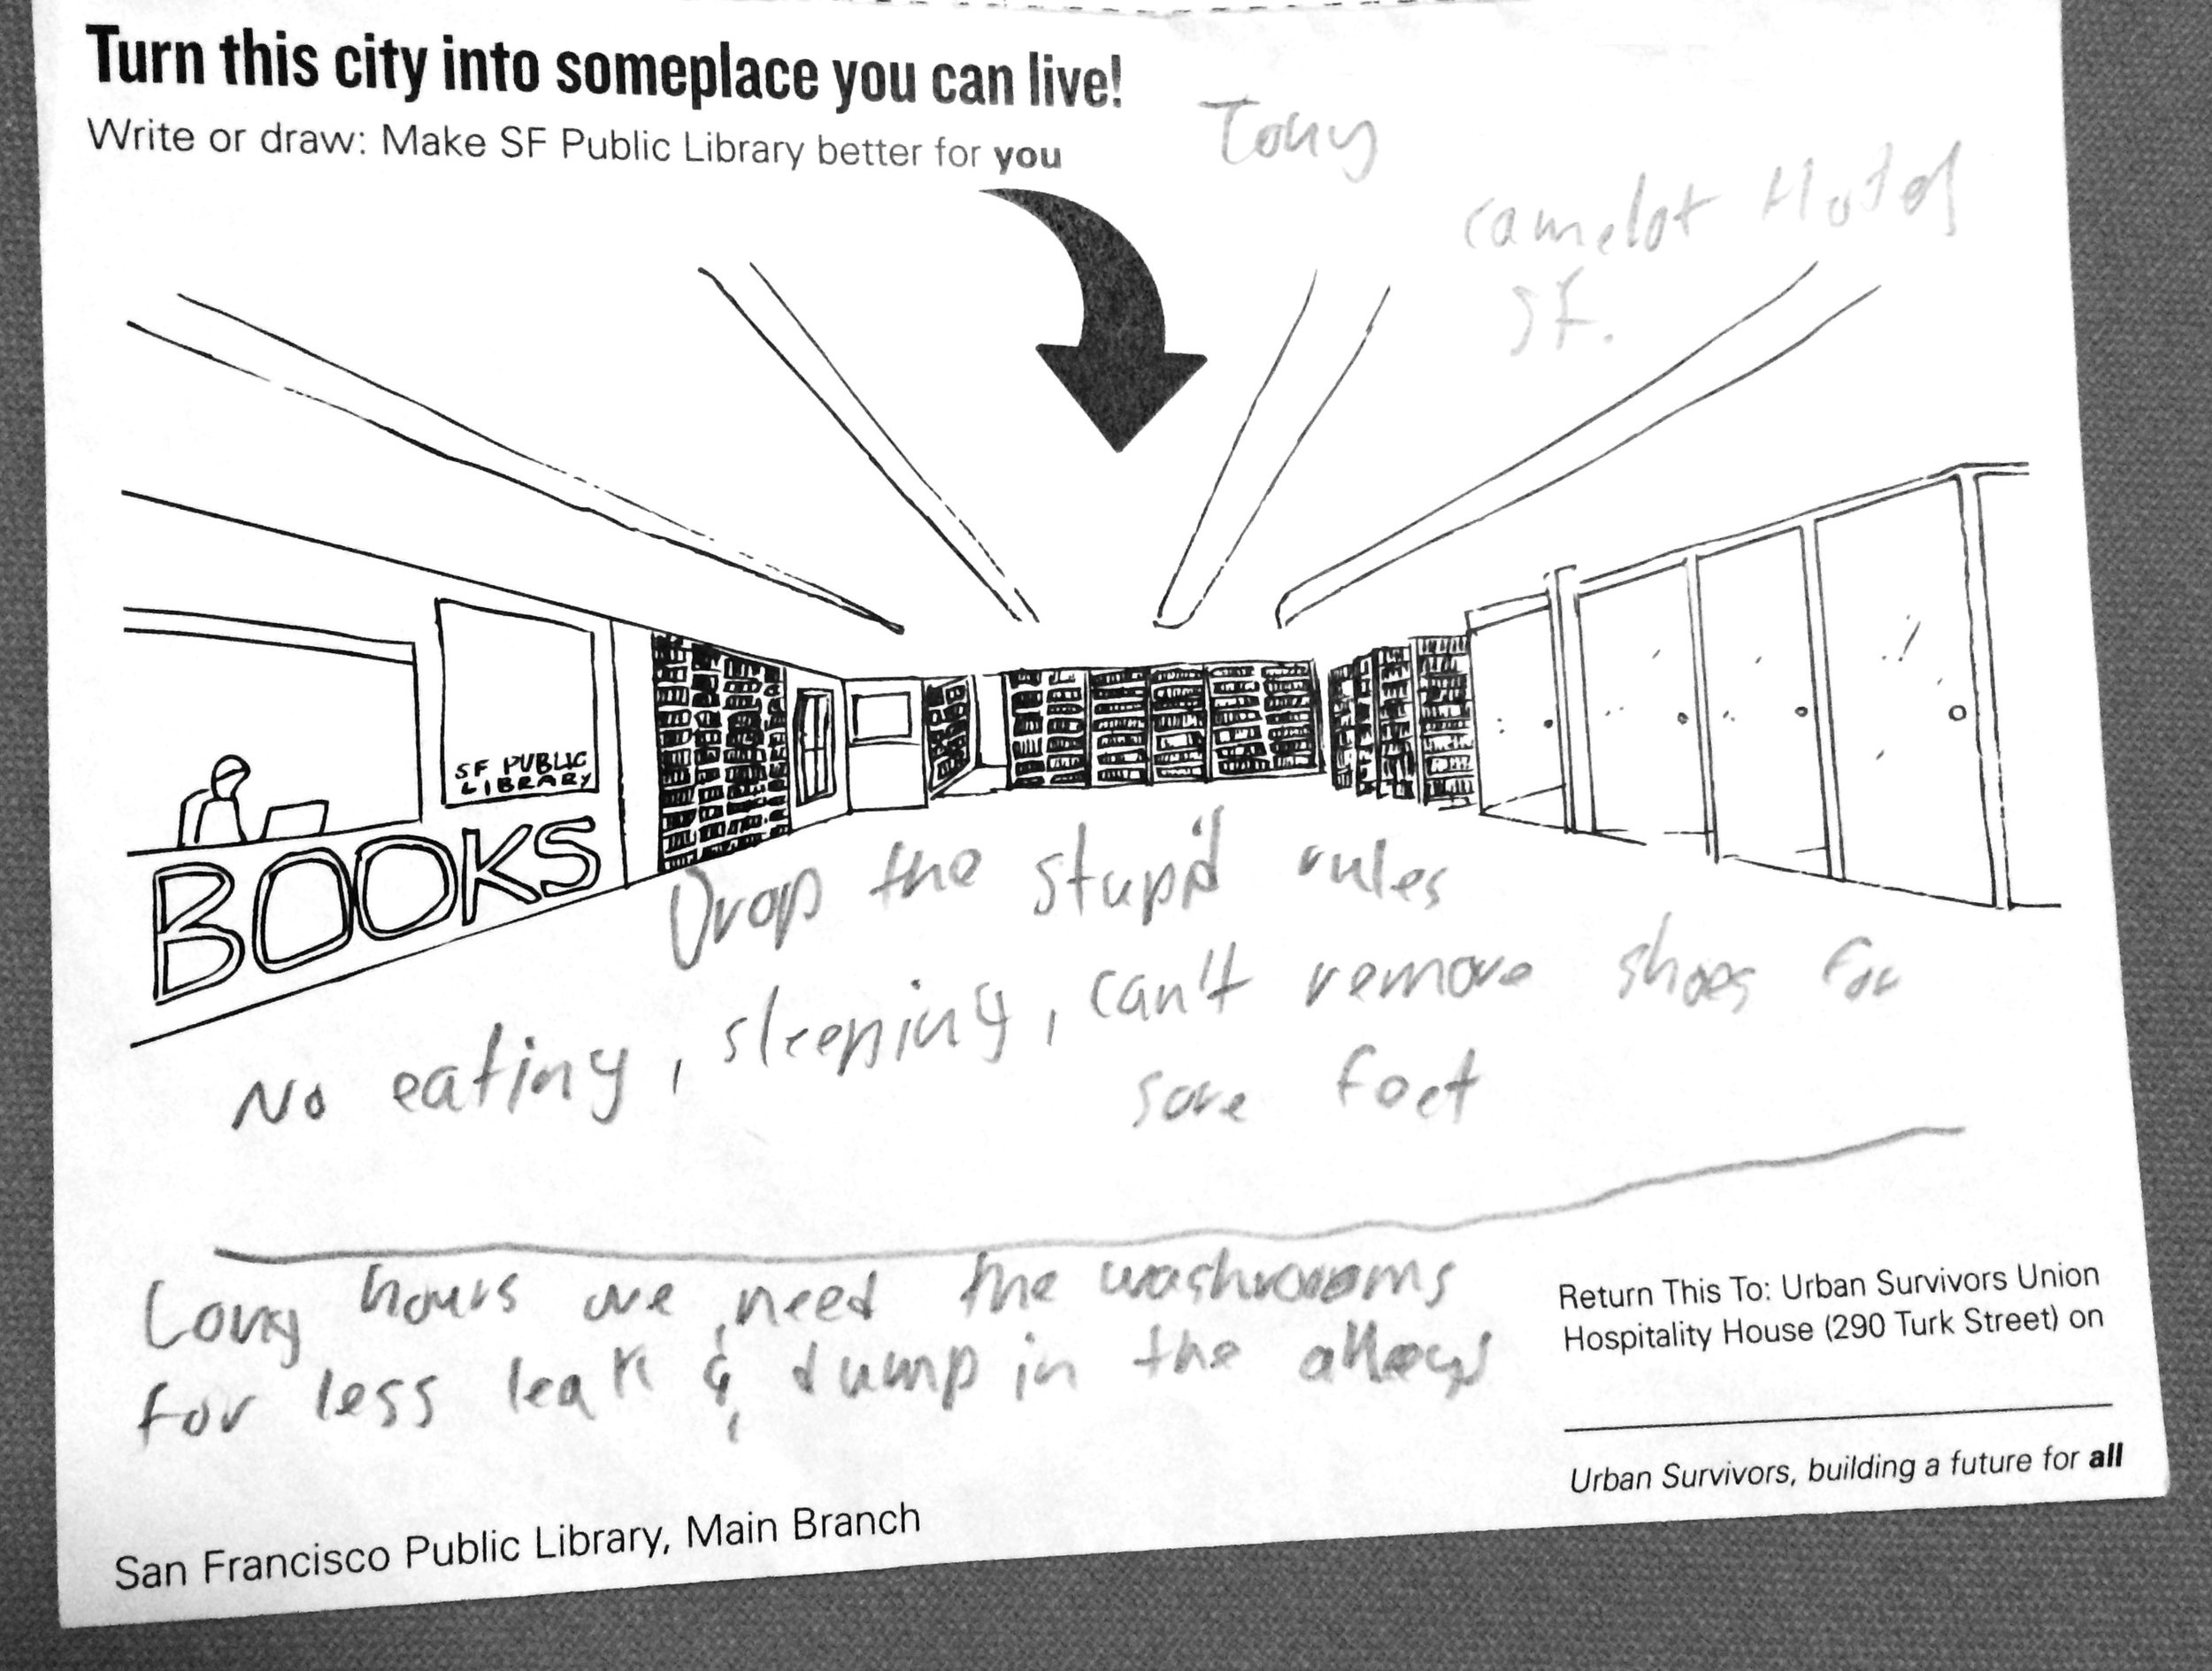 Example of a homeless resident's vision for a public library that served their needs.